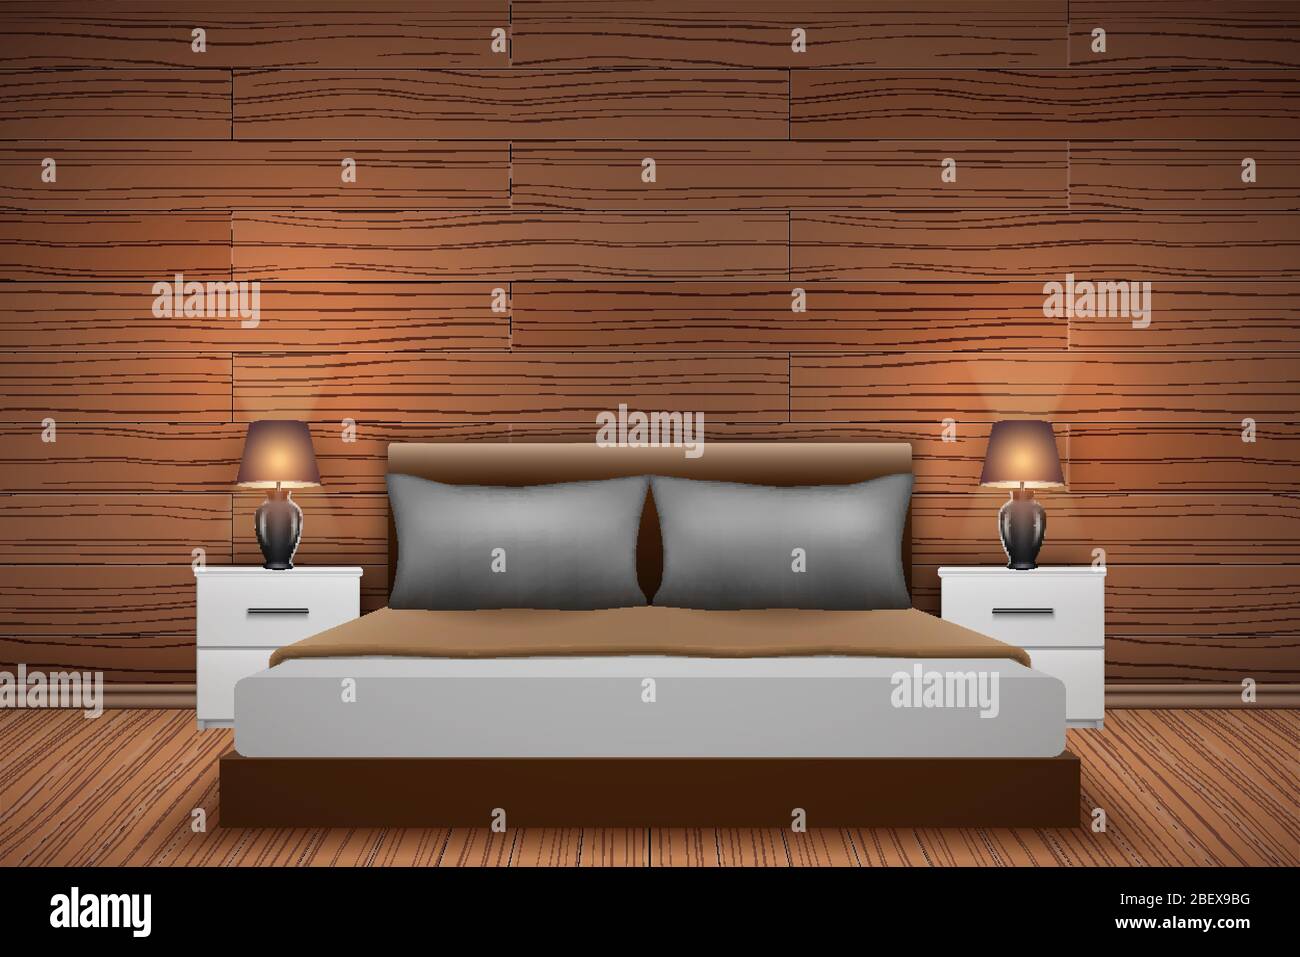 Bedroom interior with wood paneling Stock Vector